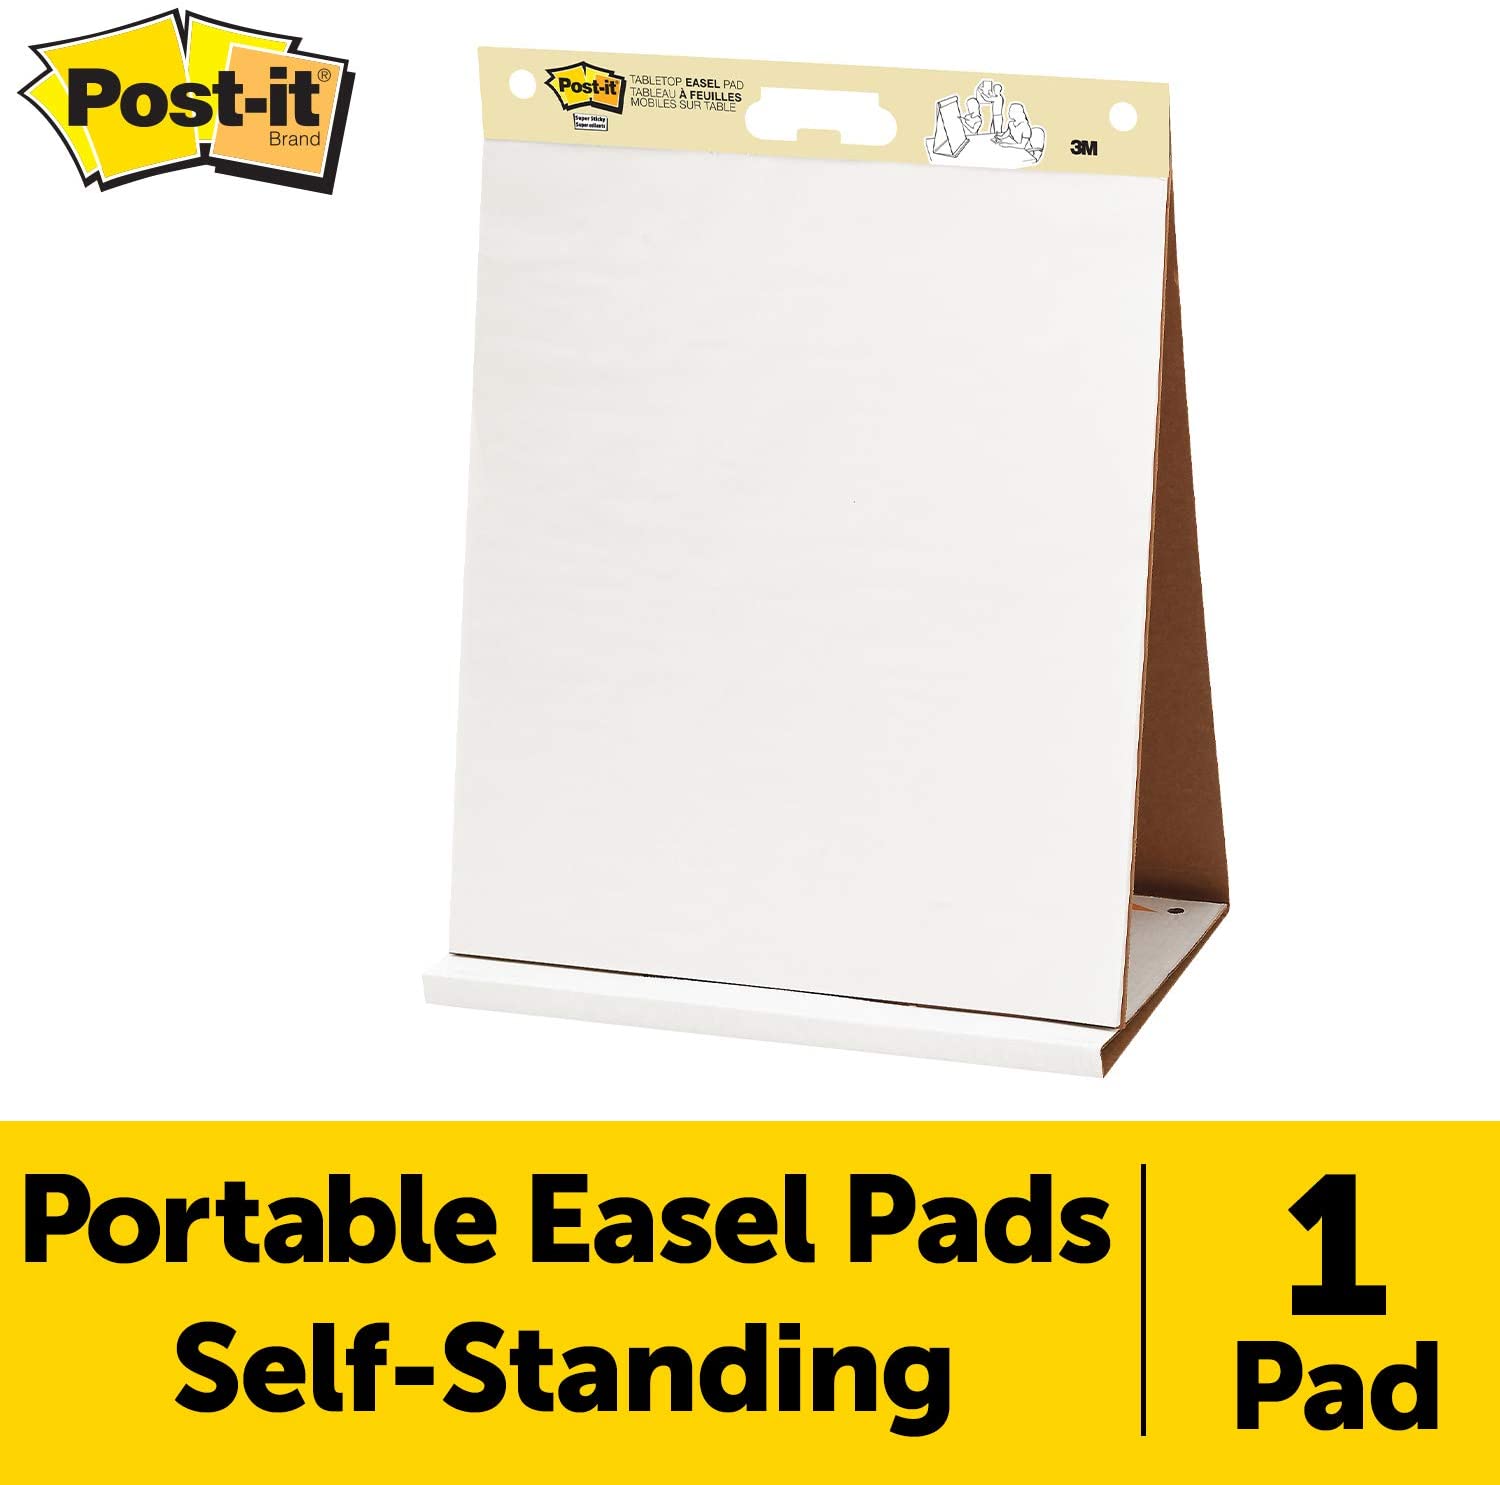 Post-it Easel Pads Super Sticky Self-Stick Wall Poster Pad 20 x 23 White  2-PK